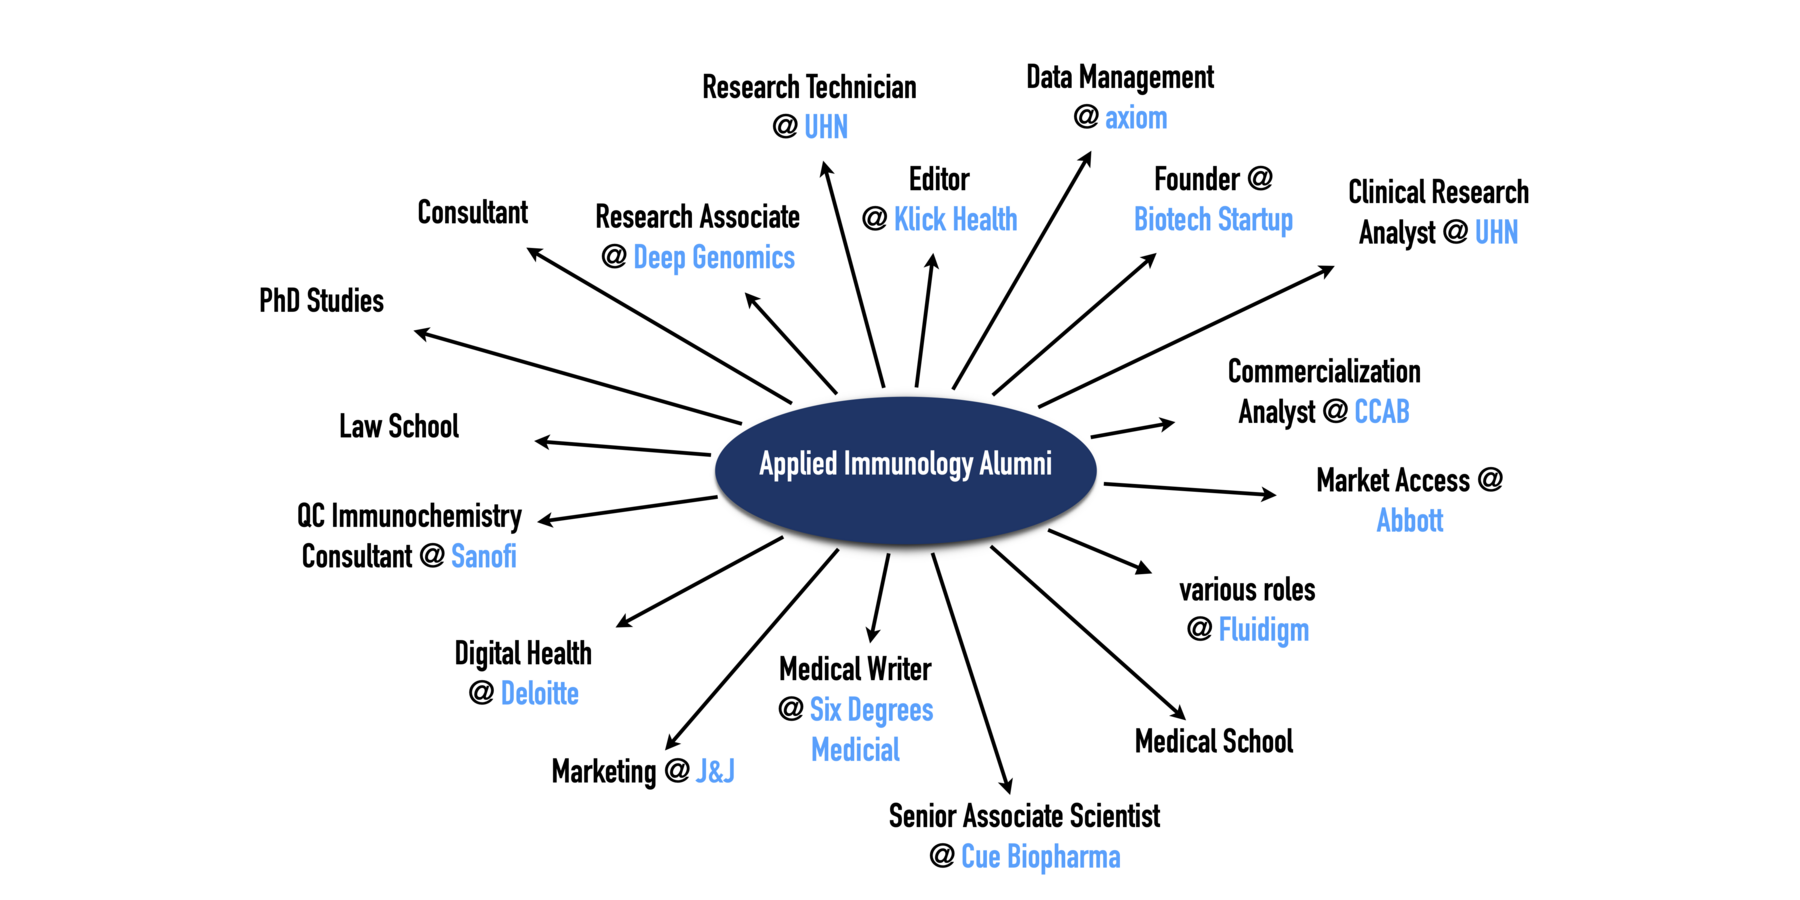 Schematic showing careers for applied immunology alumni